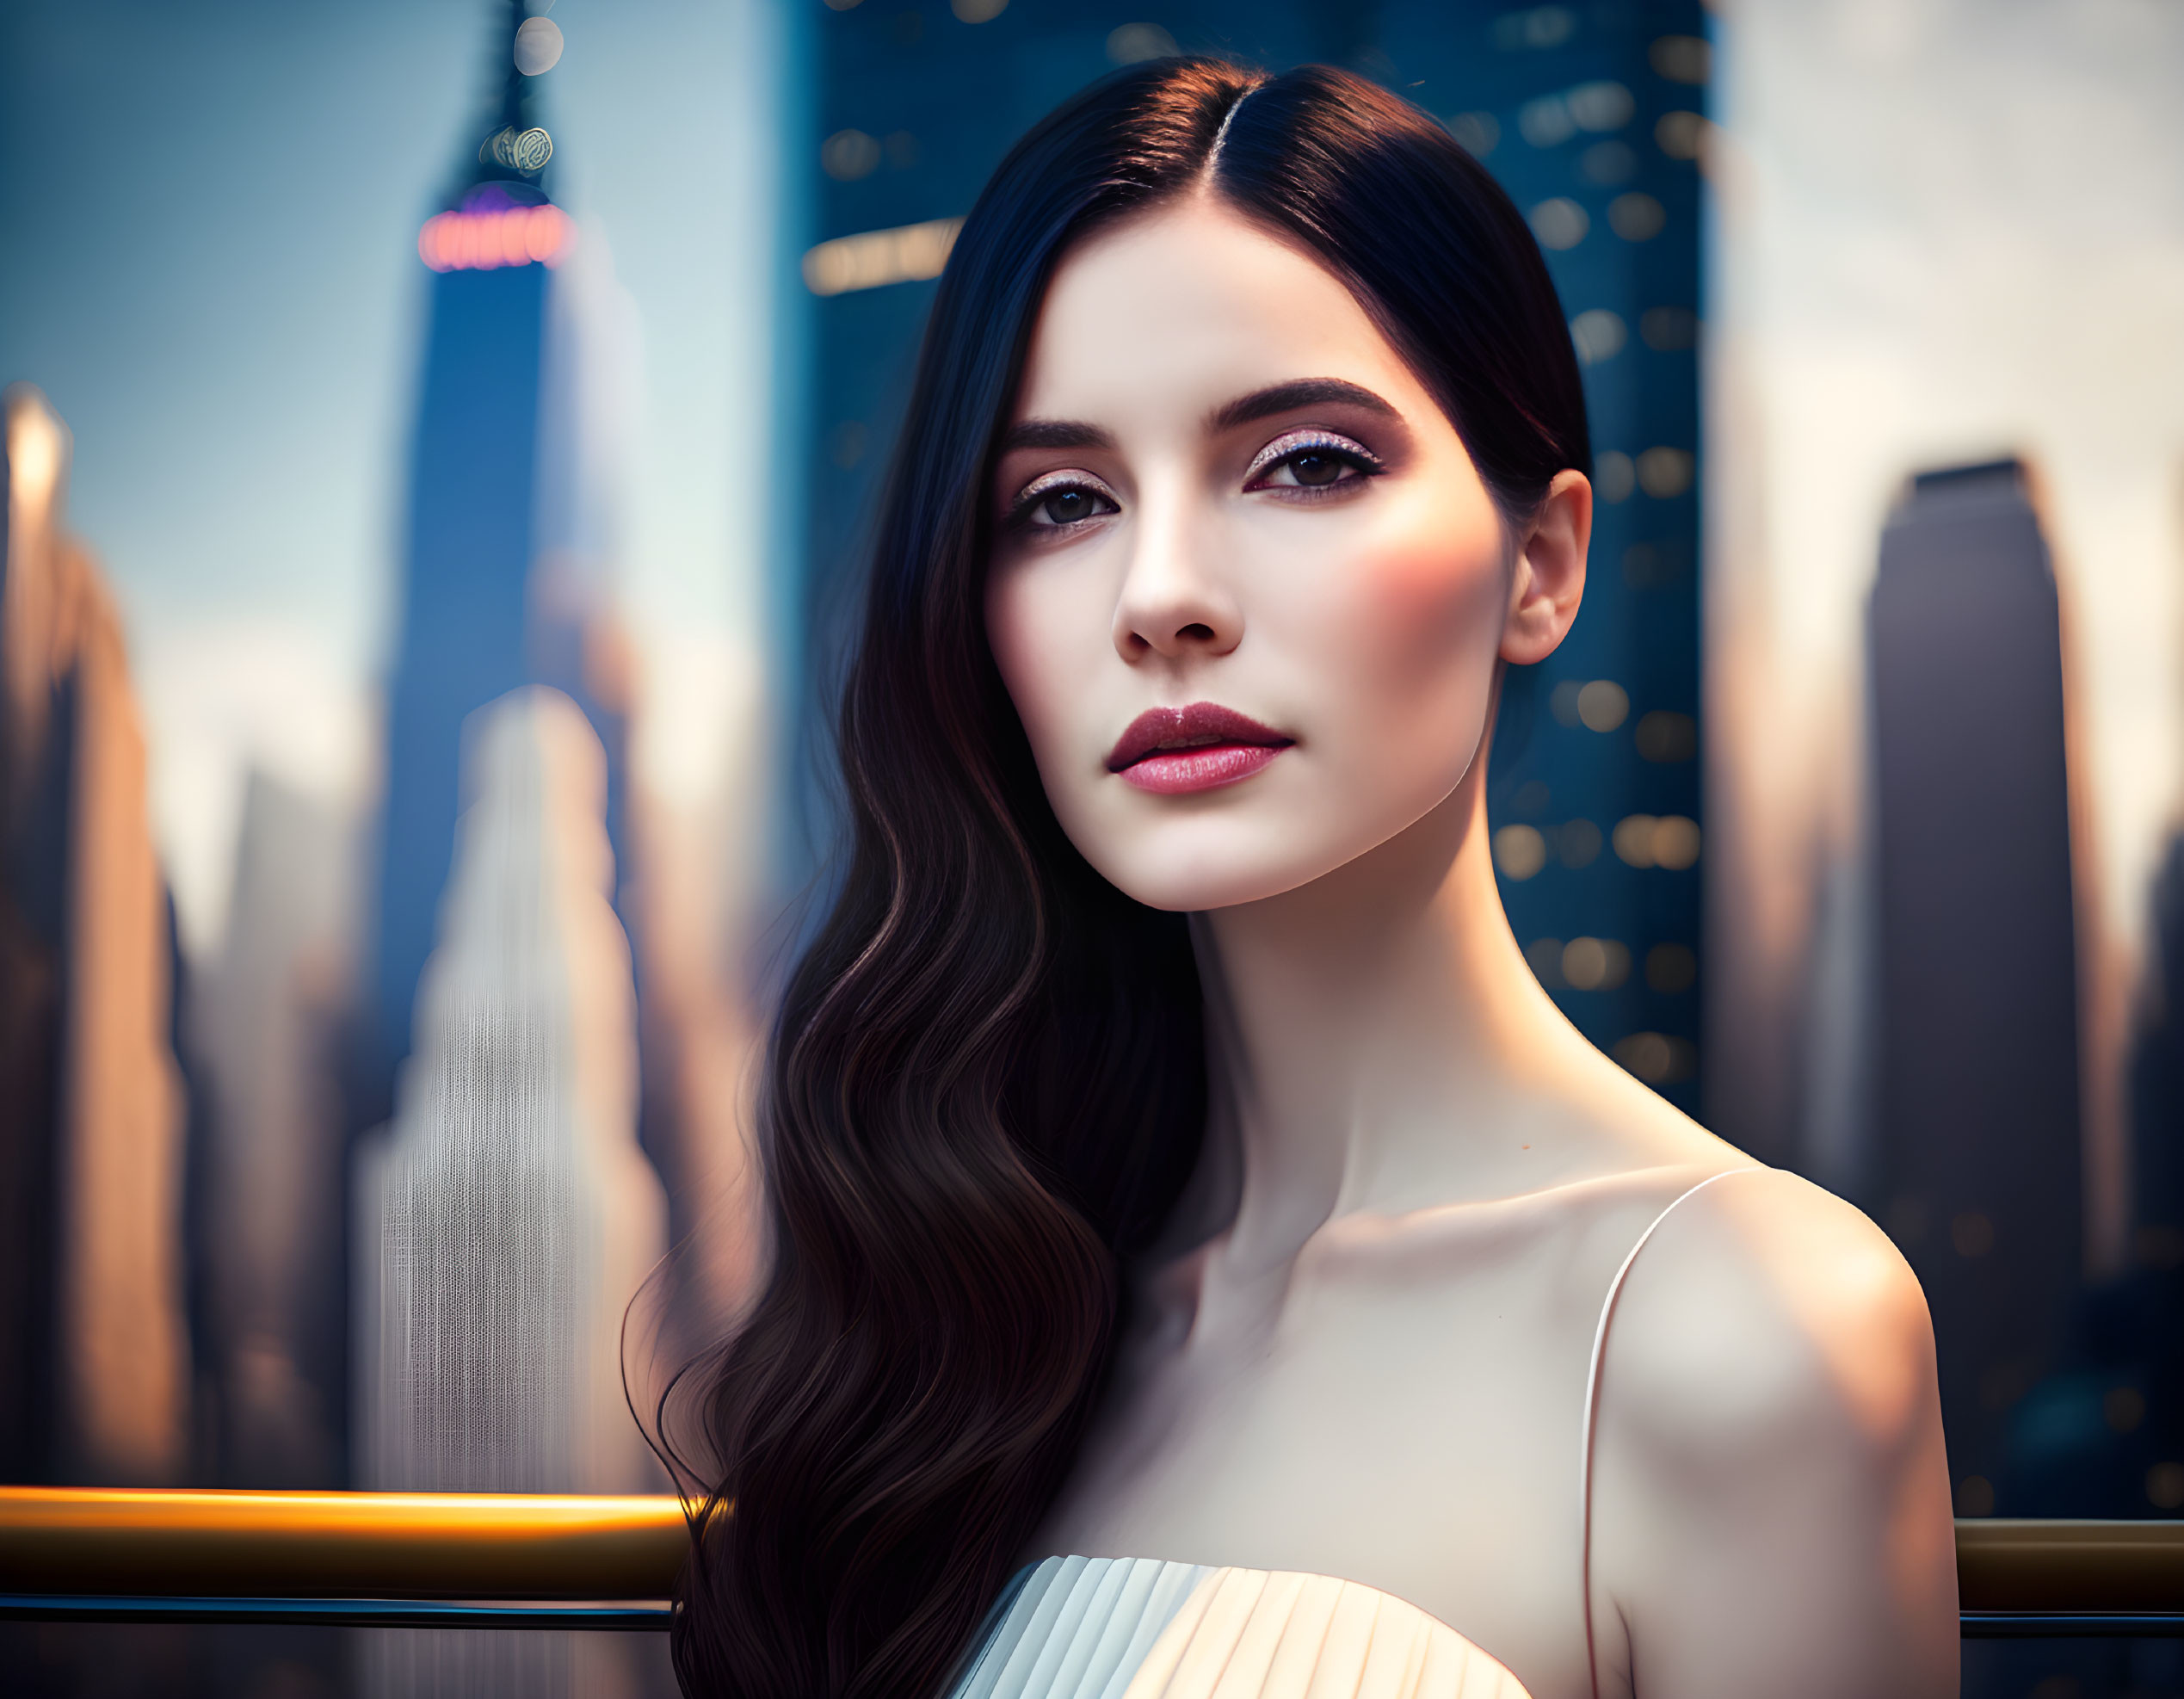 Long-haired woman with striking makeup in front of blurred cityscape under soft sunlight